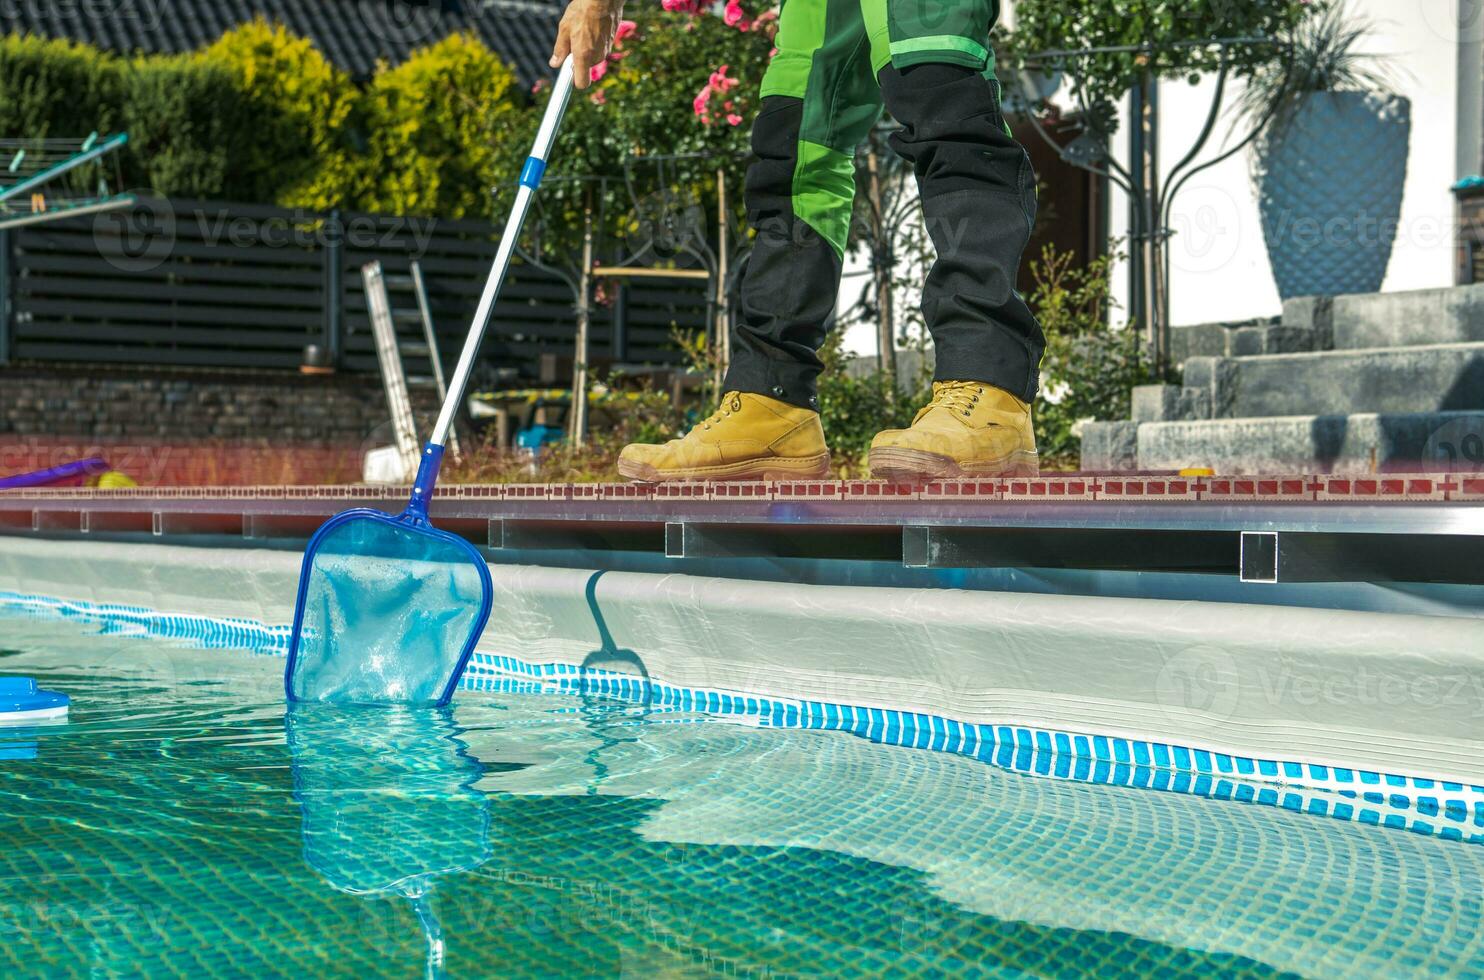 Poolside Maintenance Worker Cleaning Water Surface with a Net photo